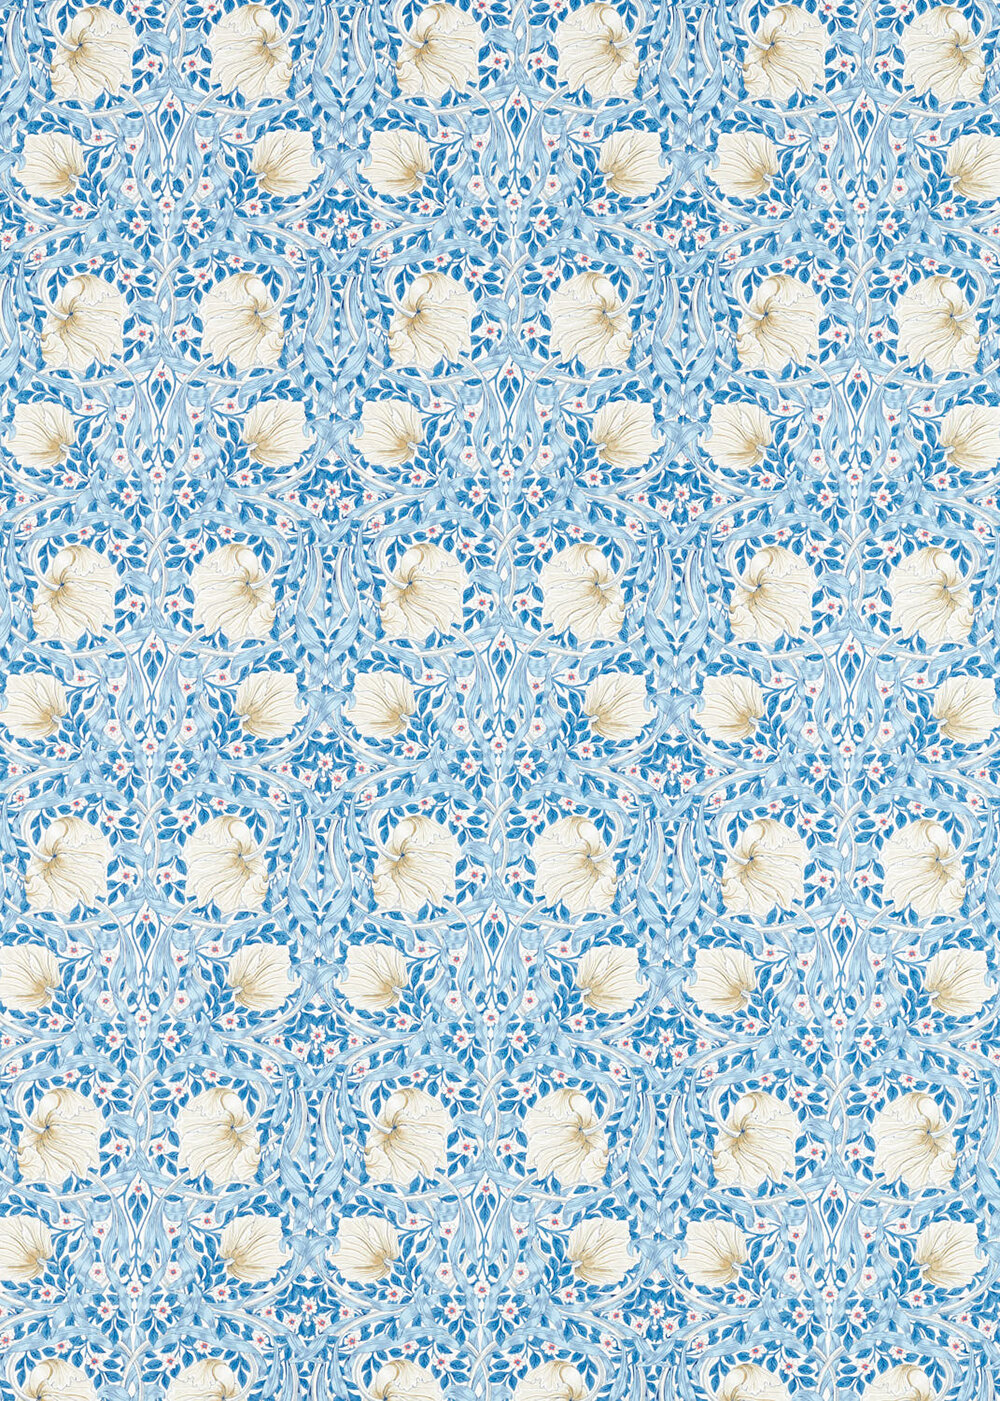 Pimpernel Fabric - Woad - by Morris